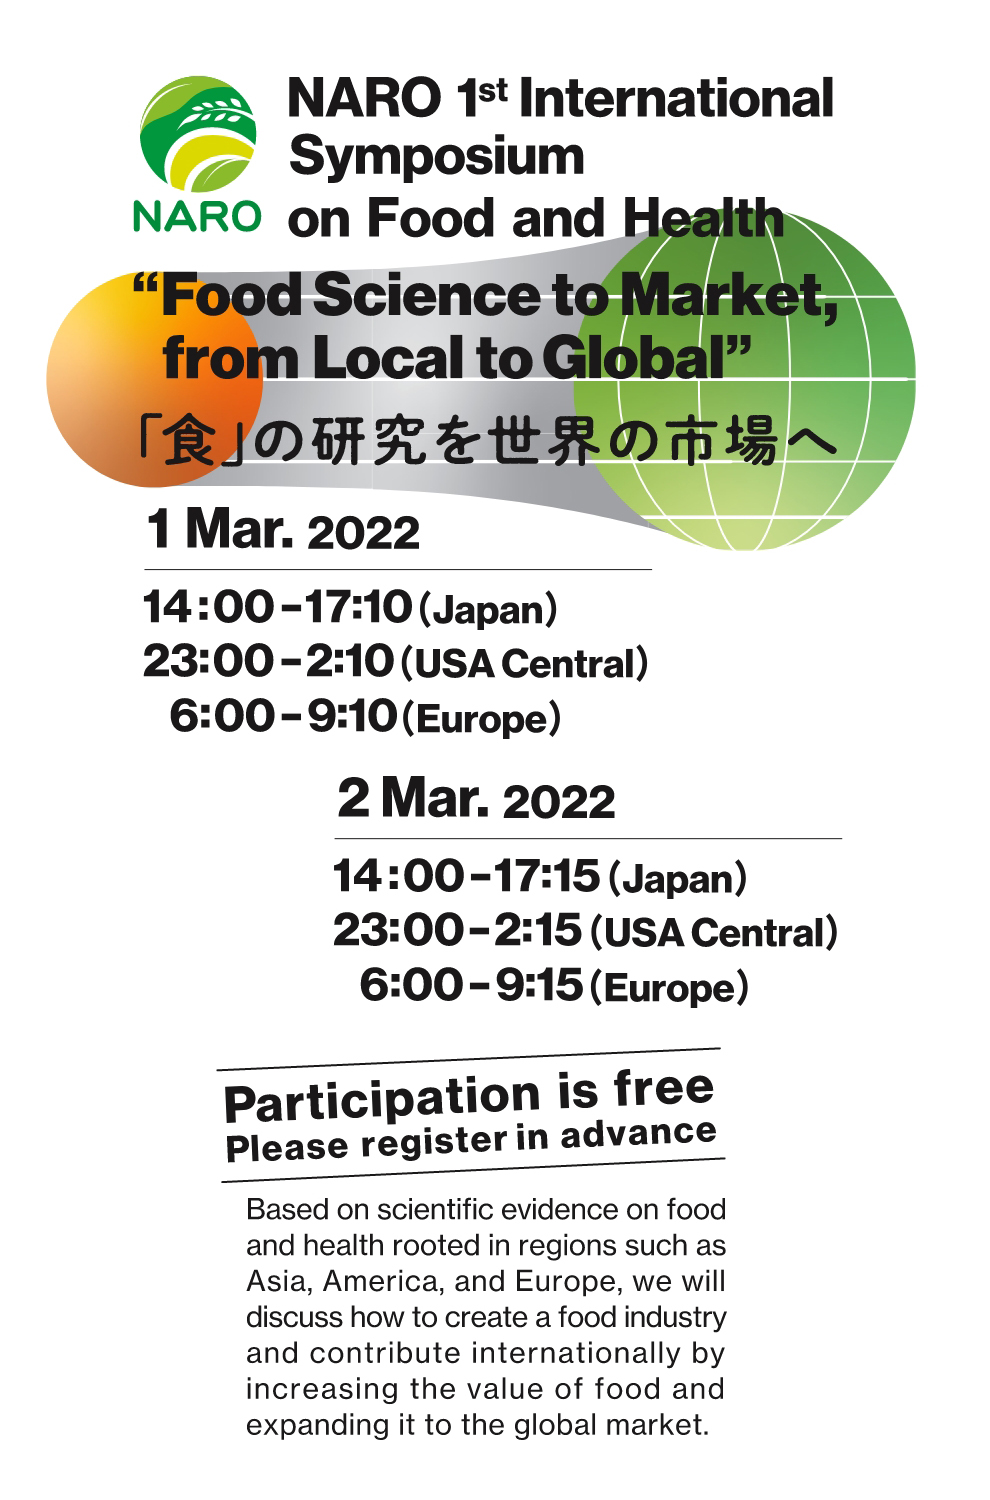 NARO 1st International Symposium on Food and Health 'Food Science to Market, from Local to Global'